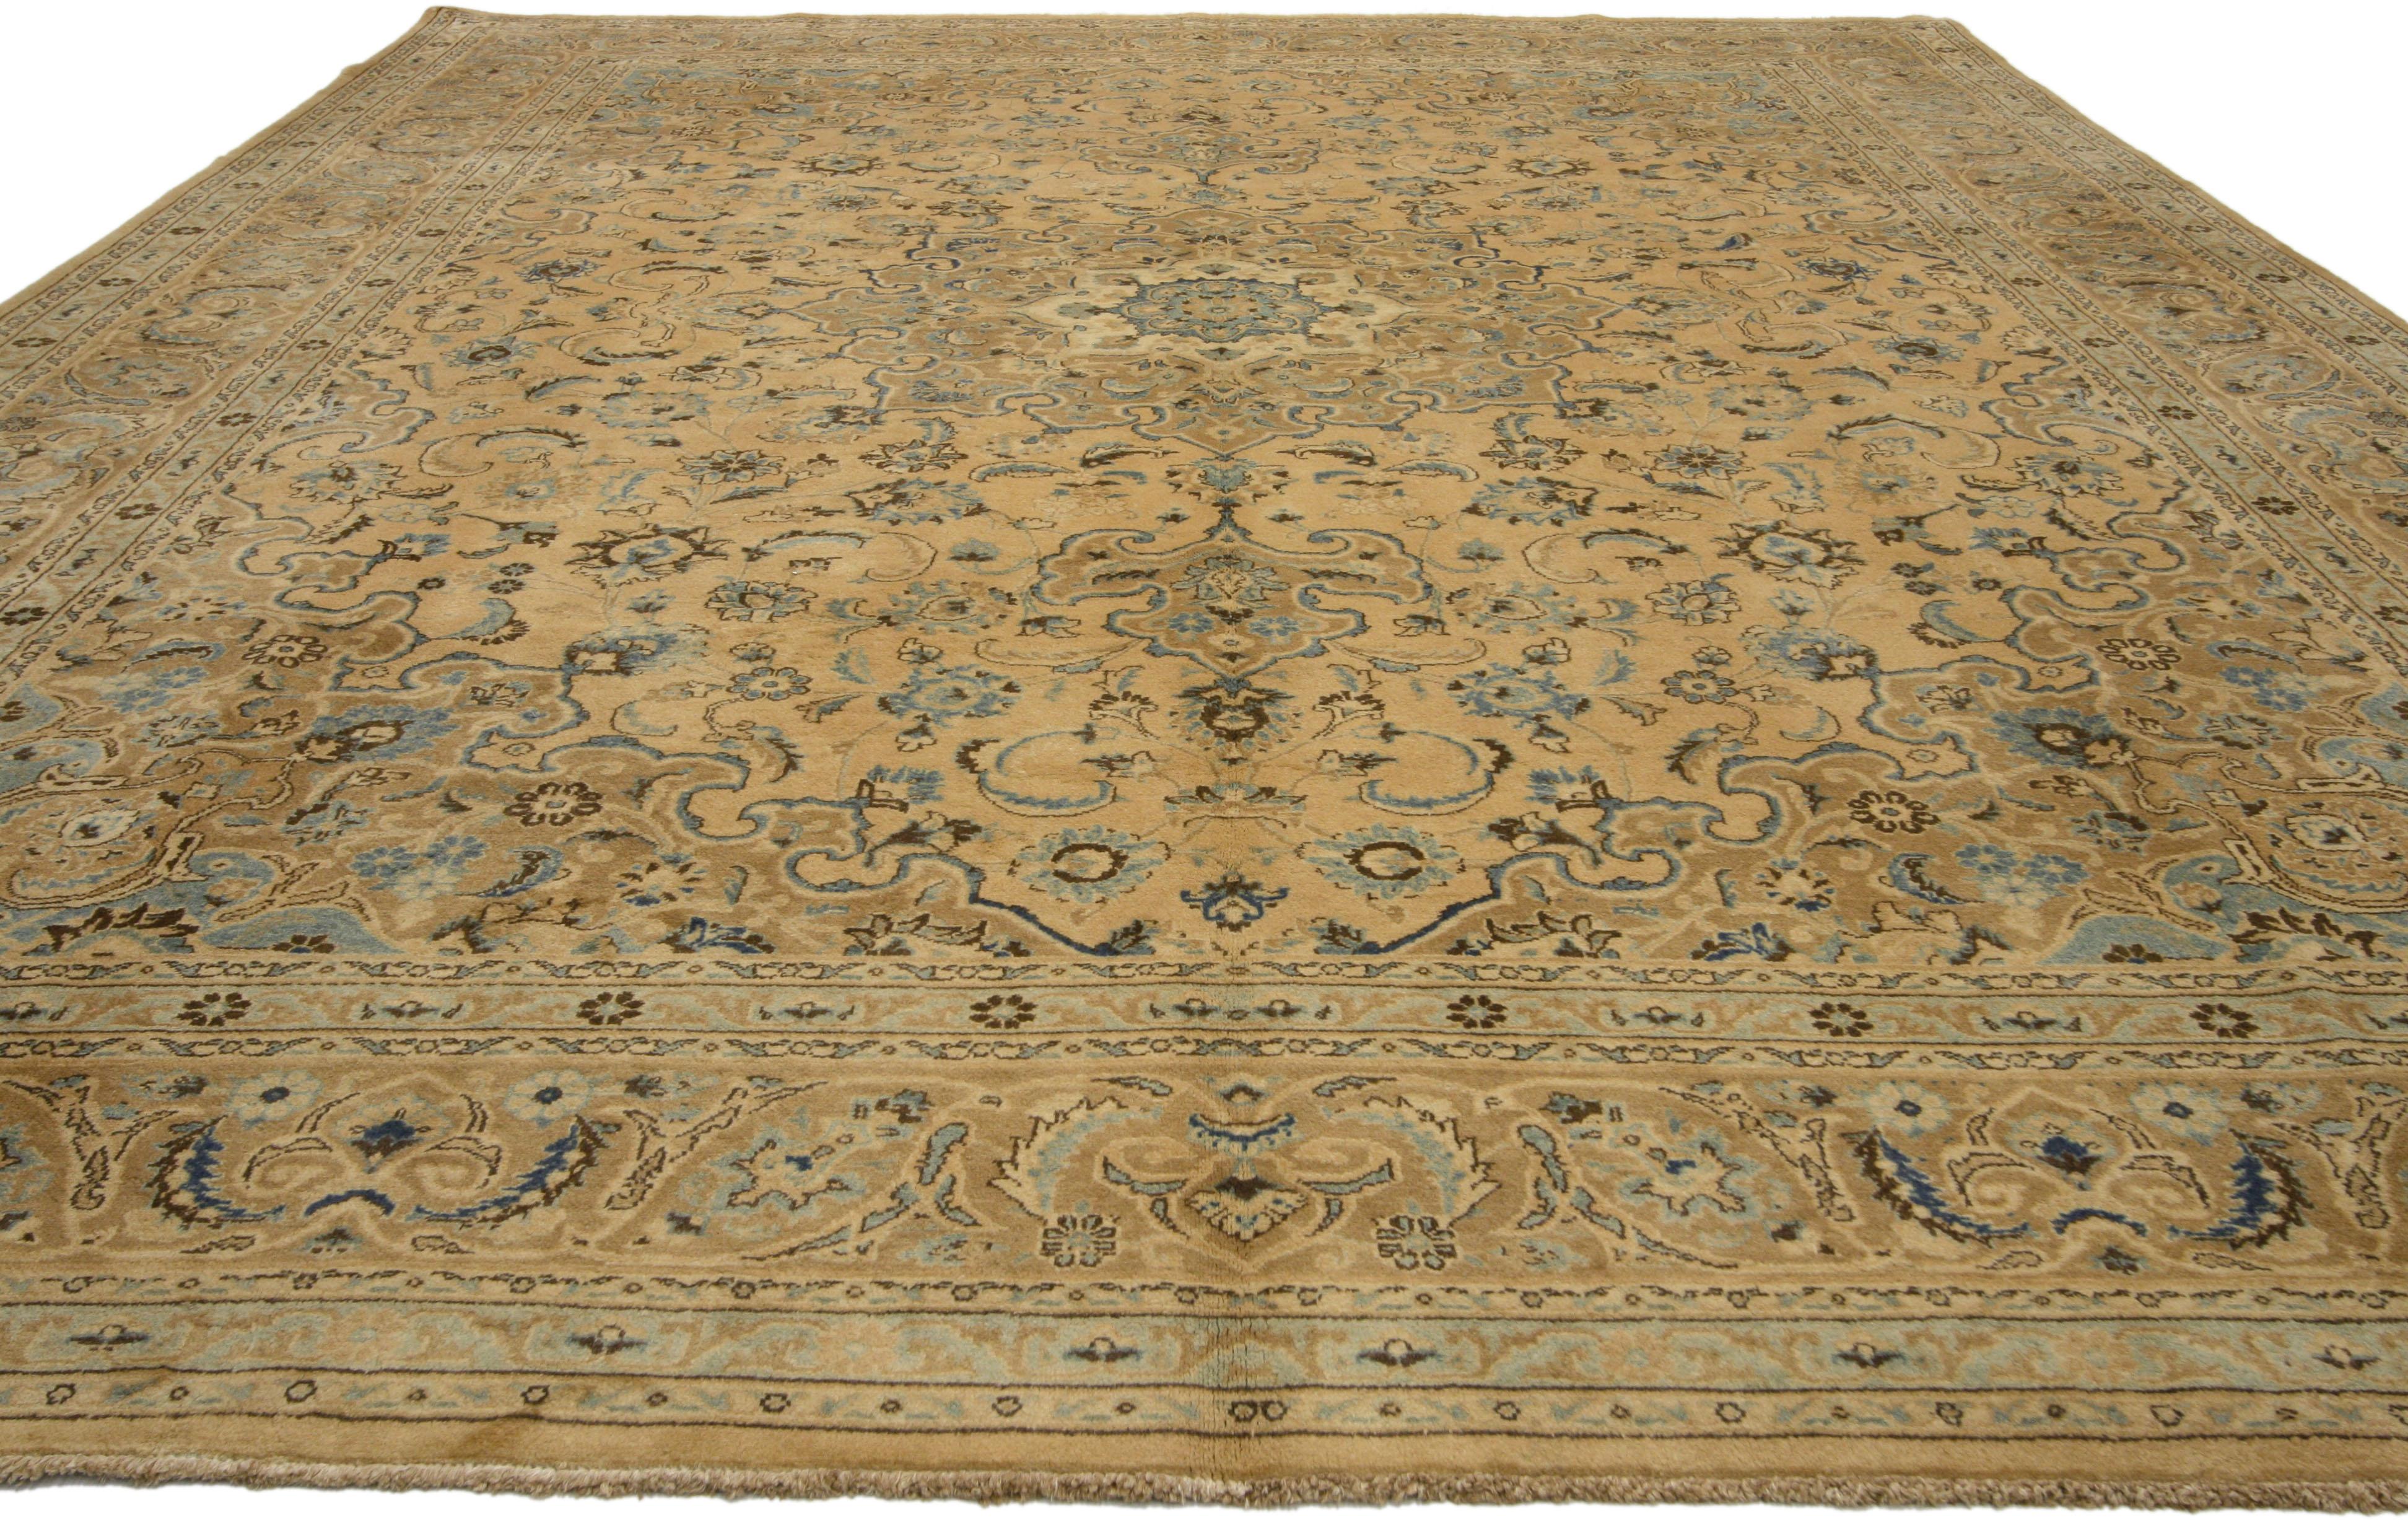 75890, vintage Persian Mashhad Area rug with traditional style. This hand-knotted wool vintage Persian Mashhad rug features a 16-point Mashhad medallion in a field of palmettes, feathers, serrated leaves and blooming flowers. The central medallion